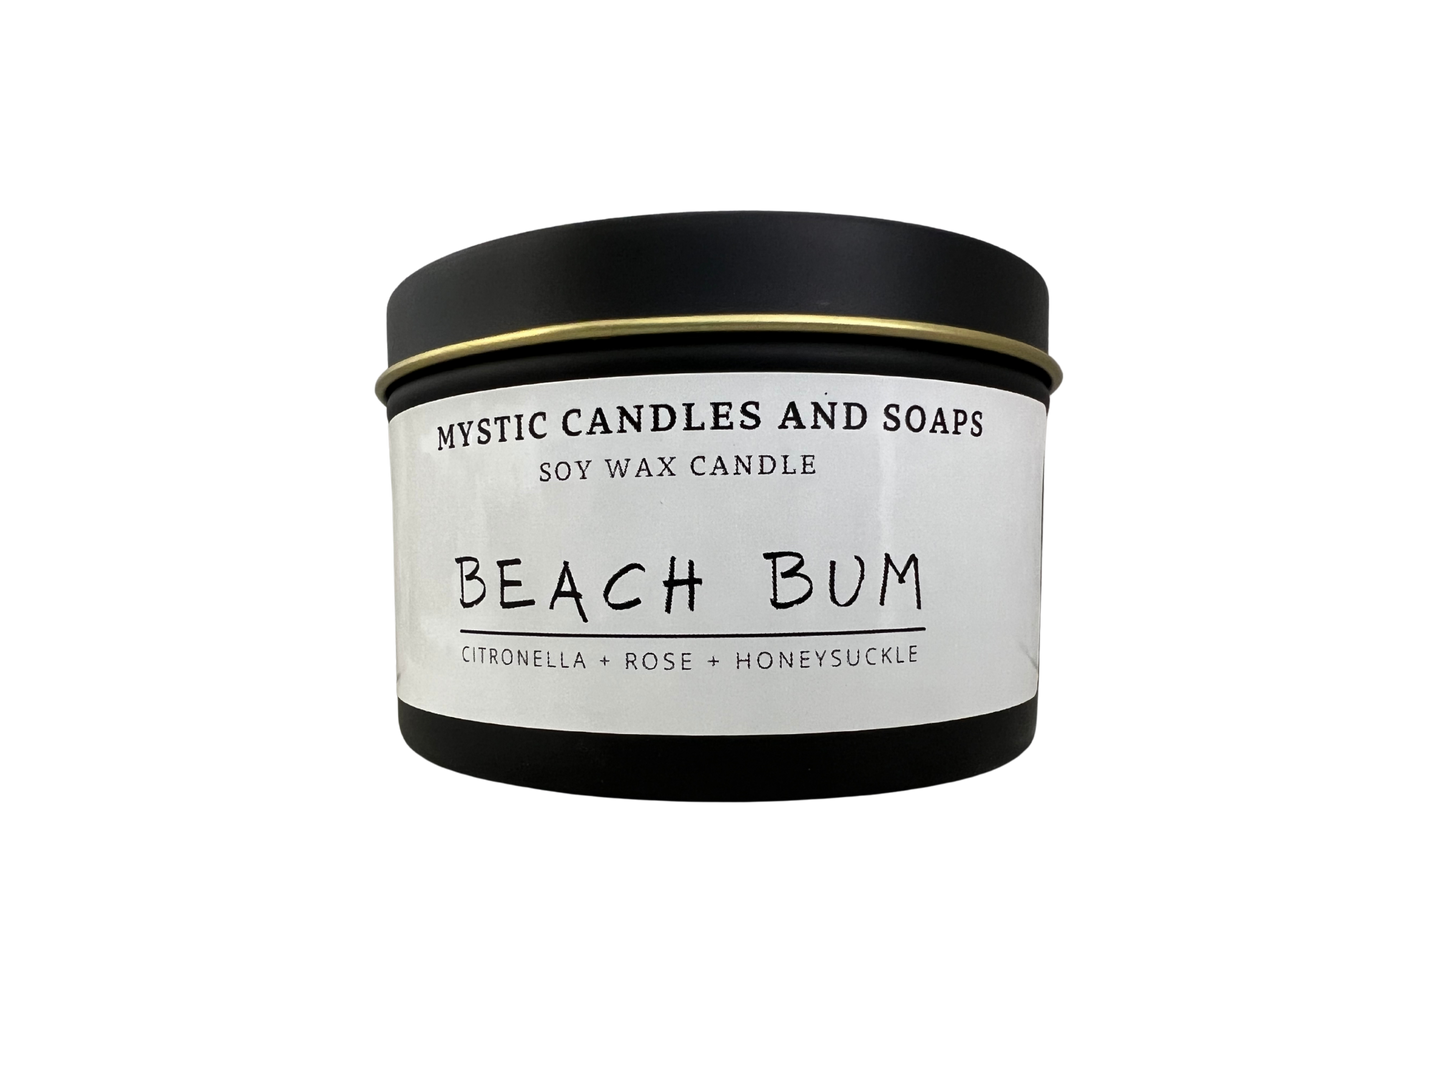 Beach Bum Soy Wax Flameless Candle - Mystic Candles and Soaps LLC